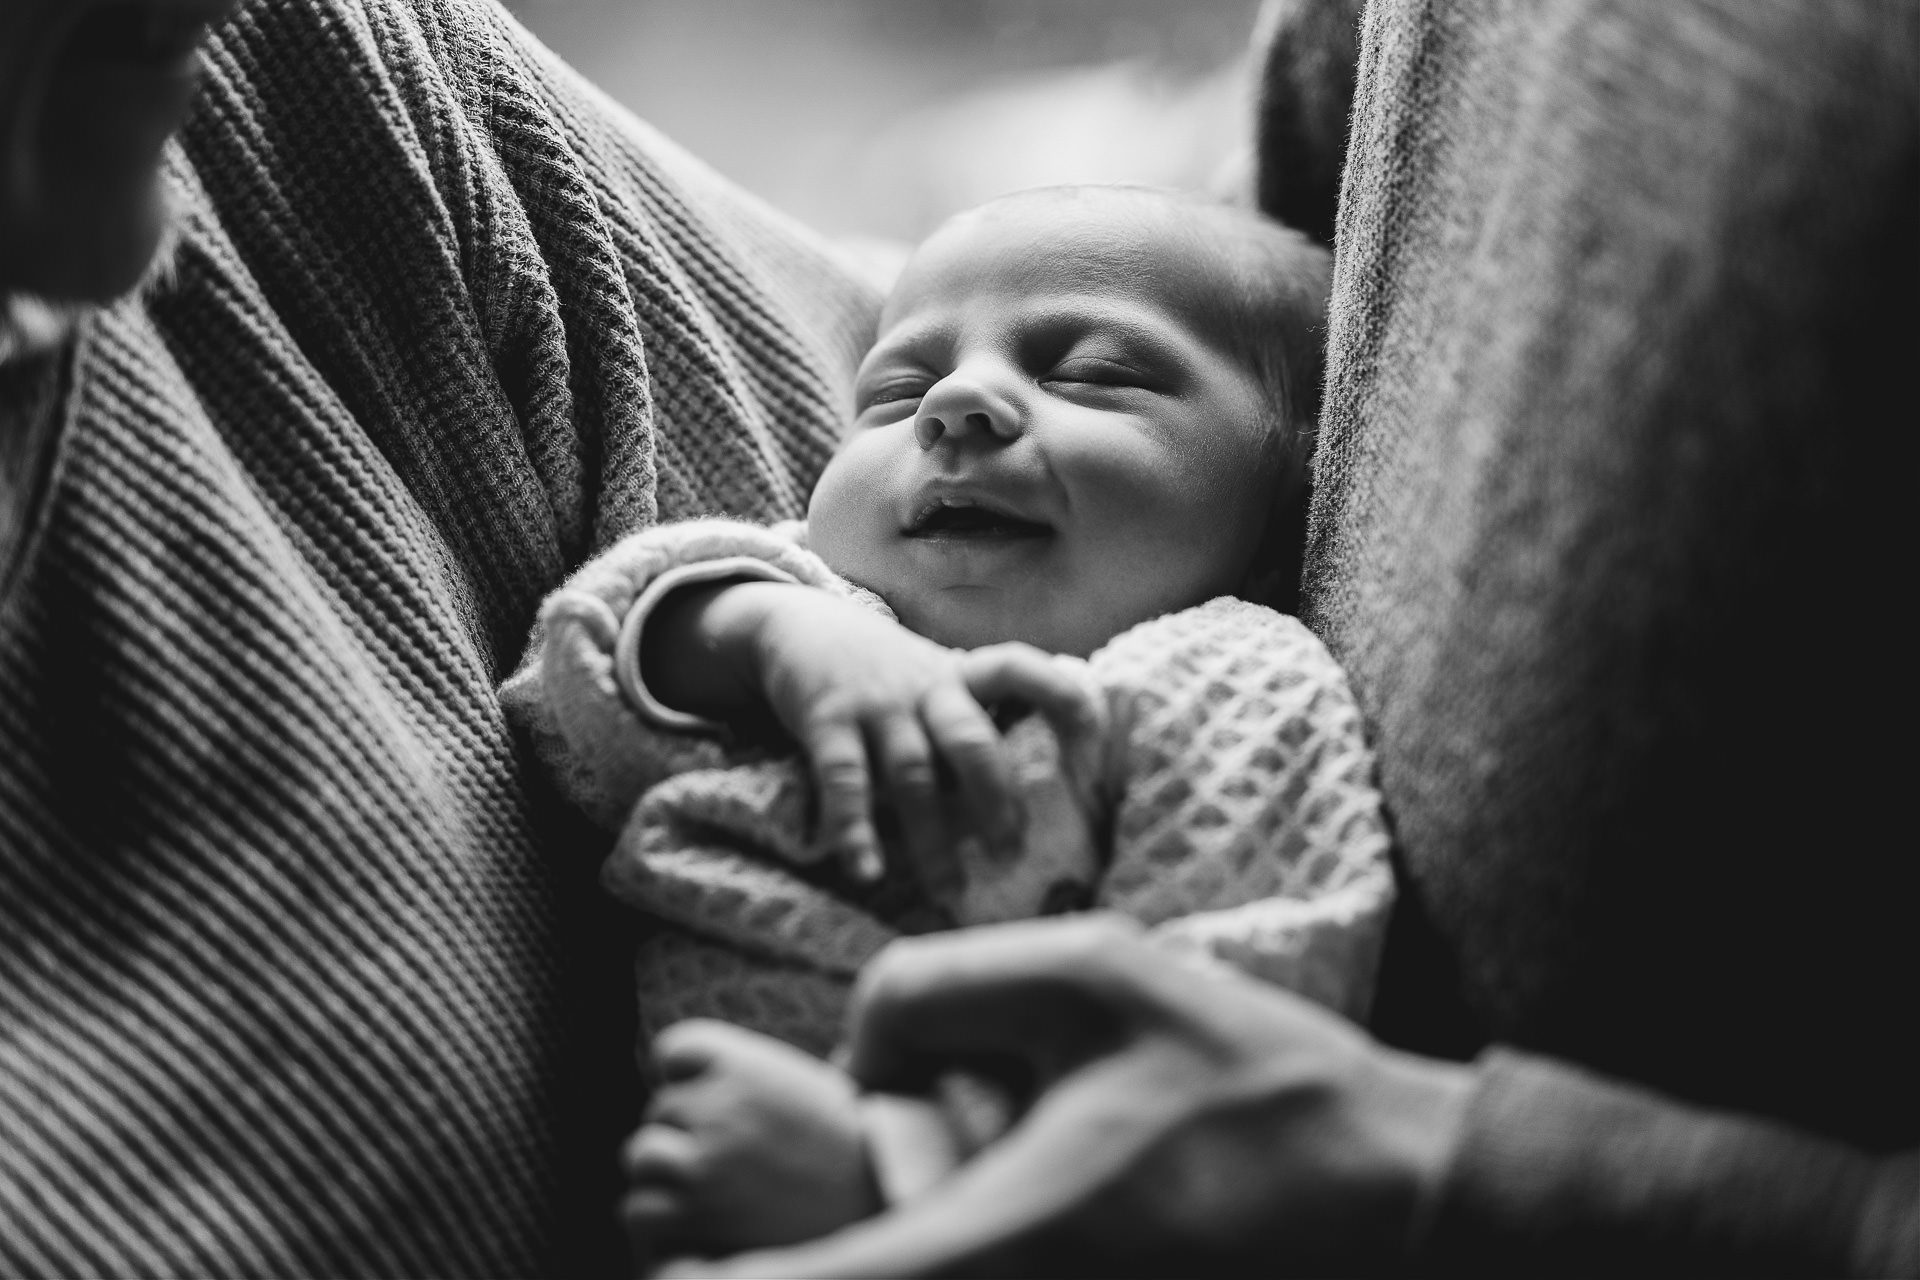 Family photography session with a baby cuddled between two parents